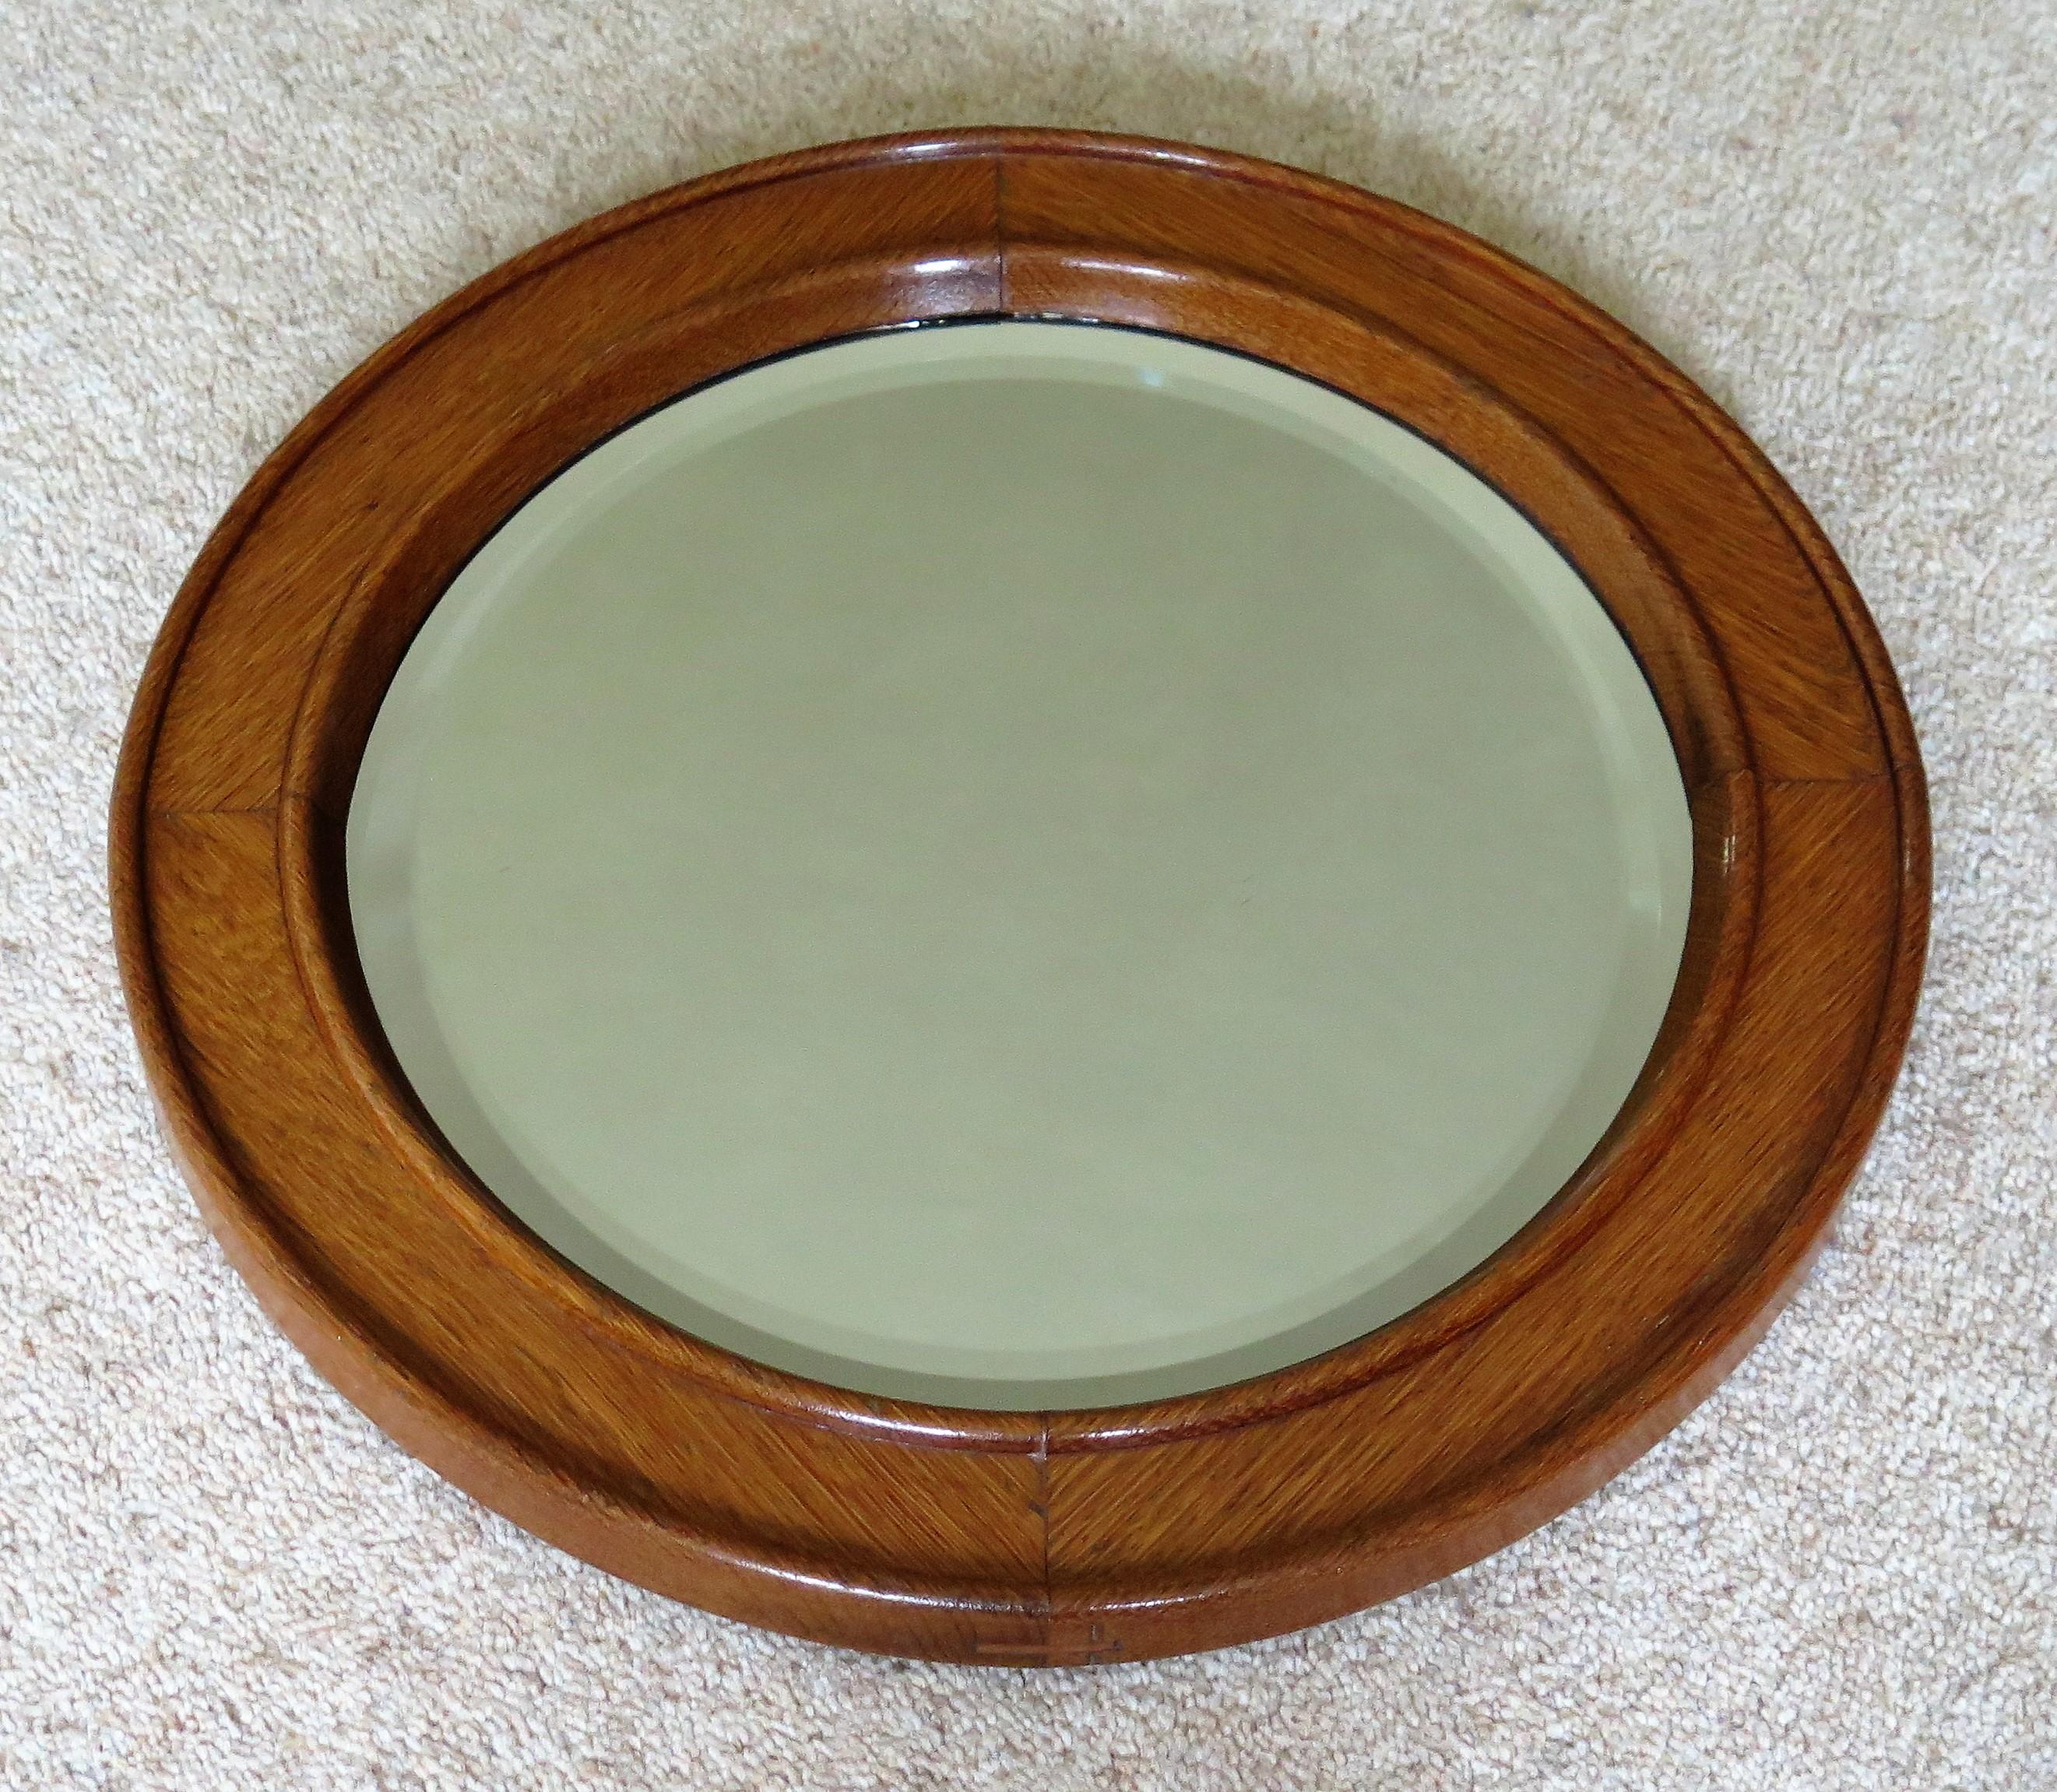 19th C. Arts & Crafts Circular Wall Mirror Golden Oak Jointed Frame Bevel Glass 4